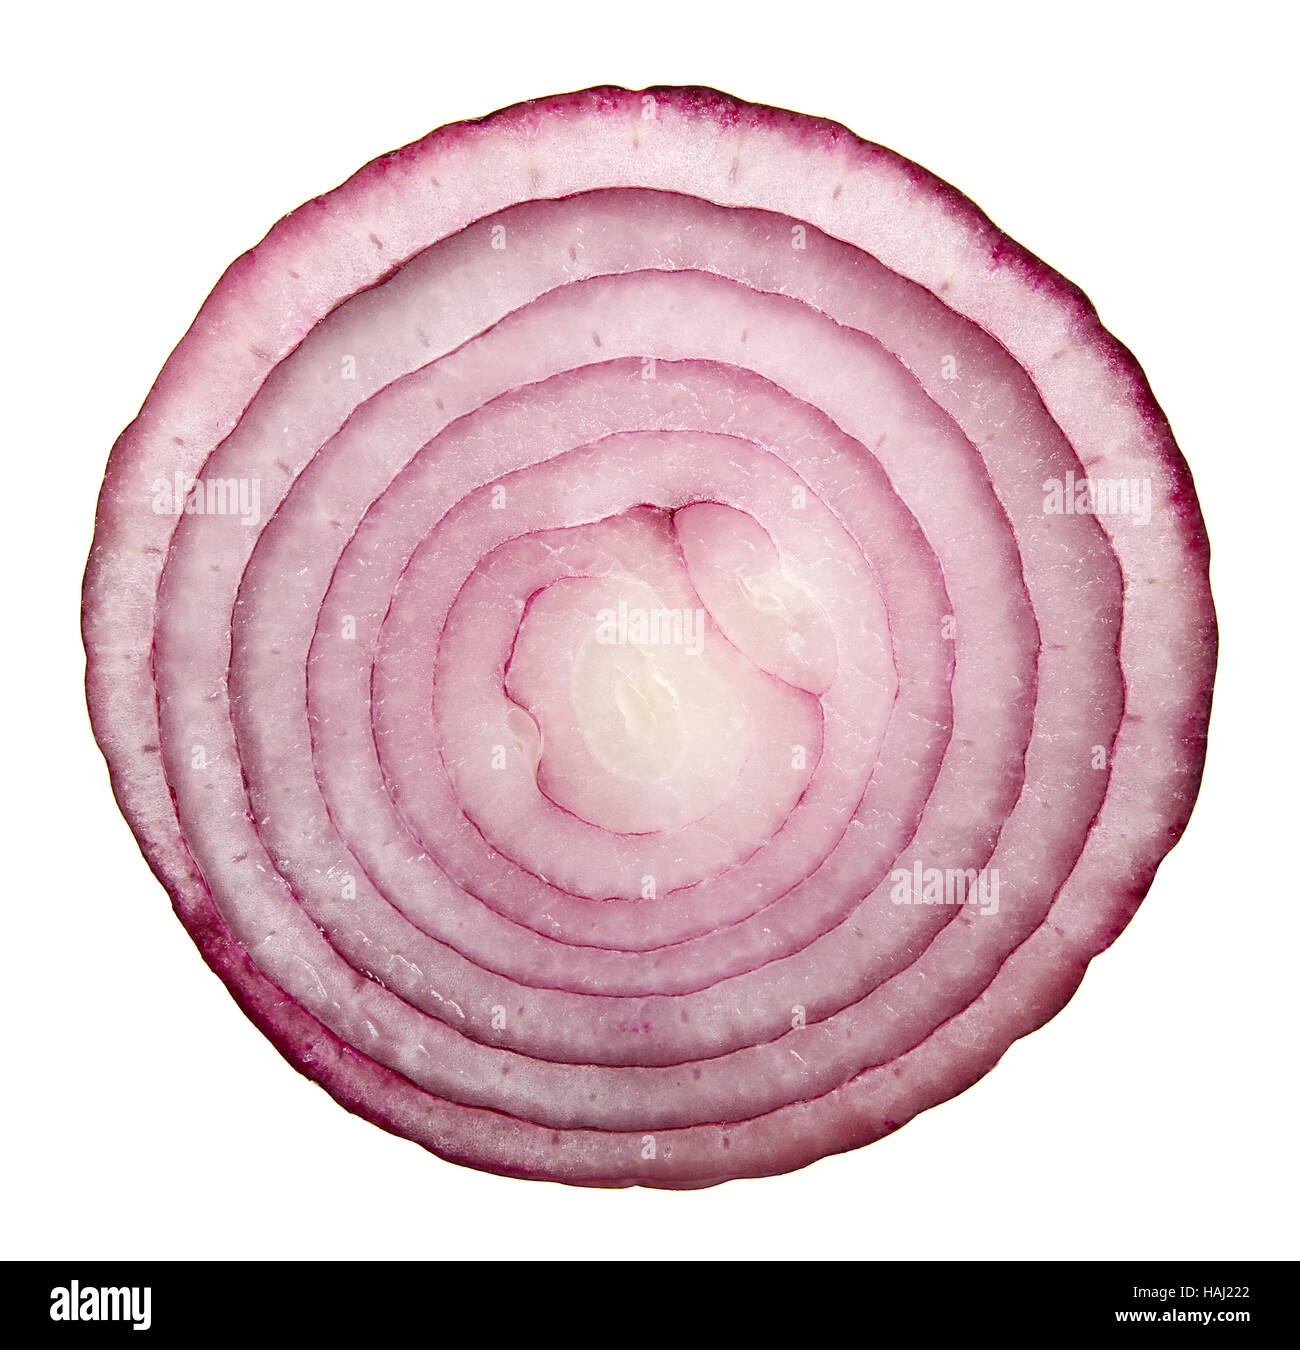 slice of red onion isolated on white background Stock Photo